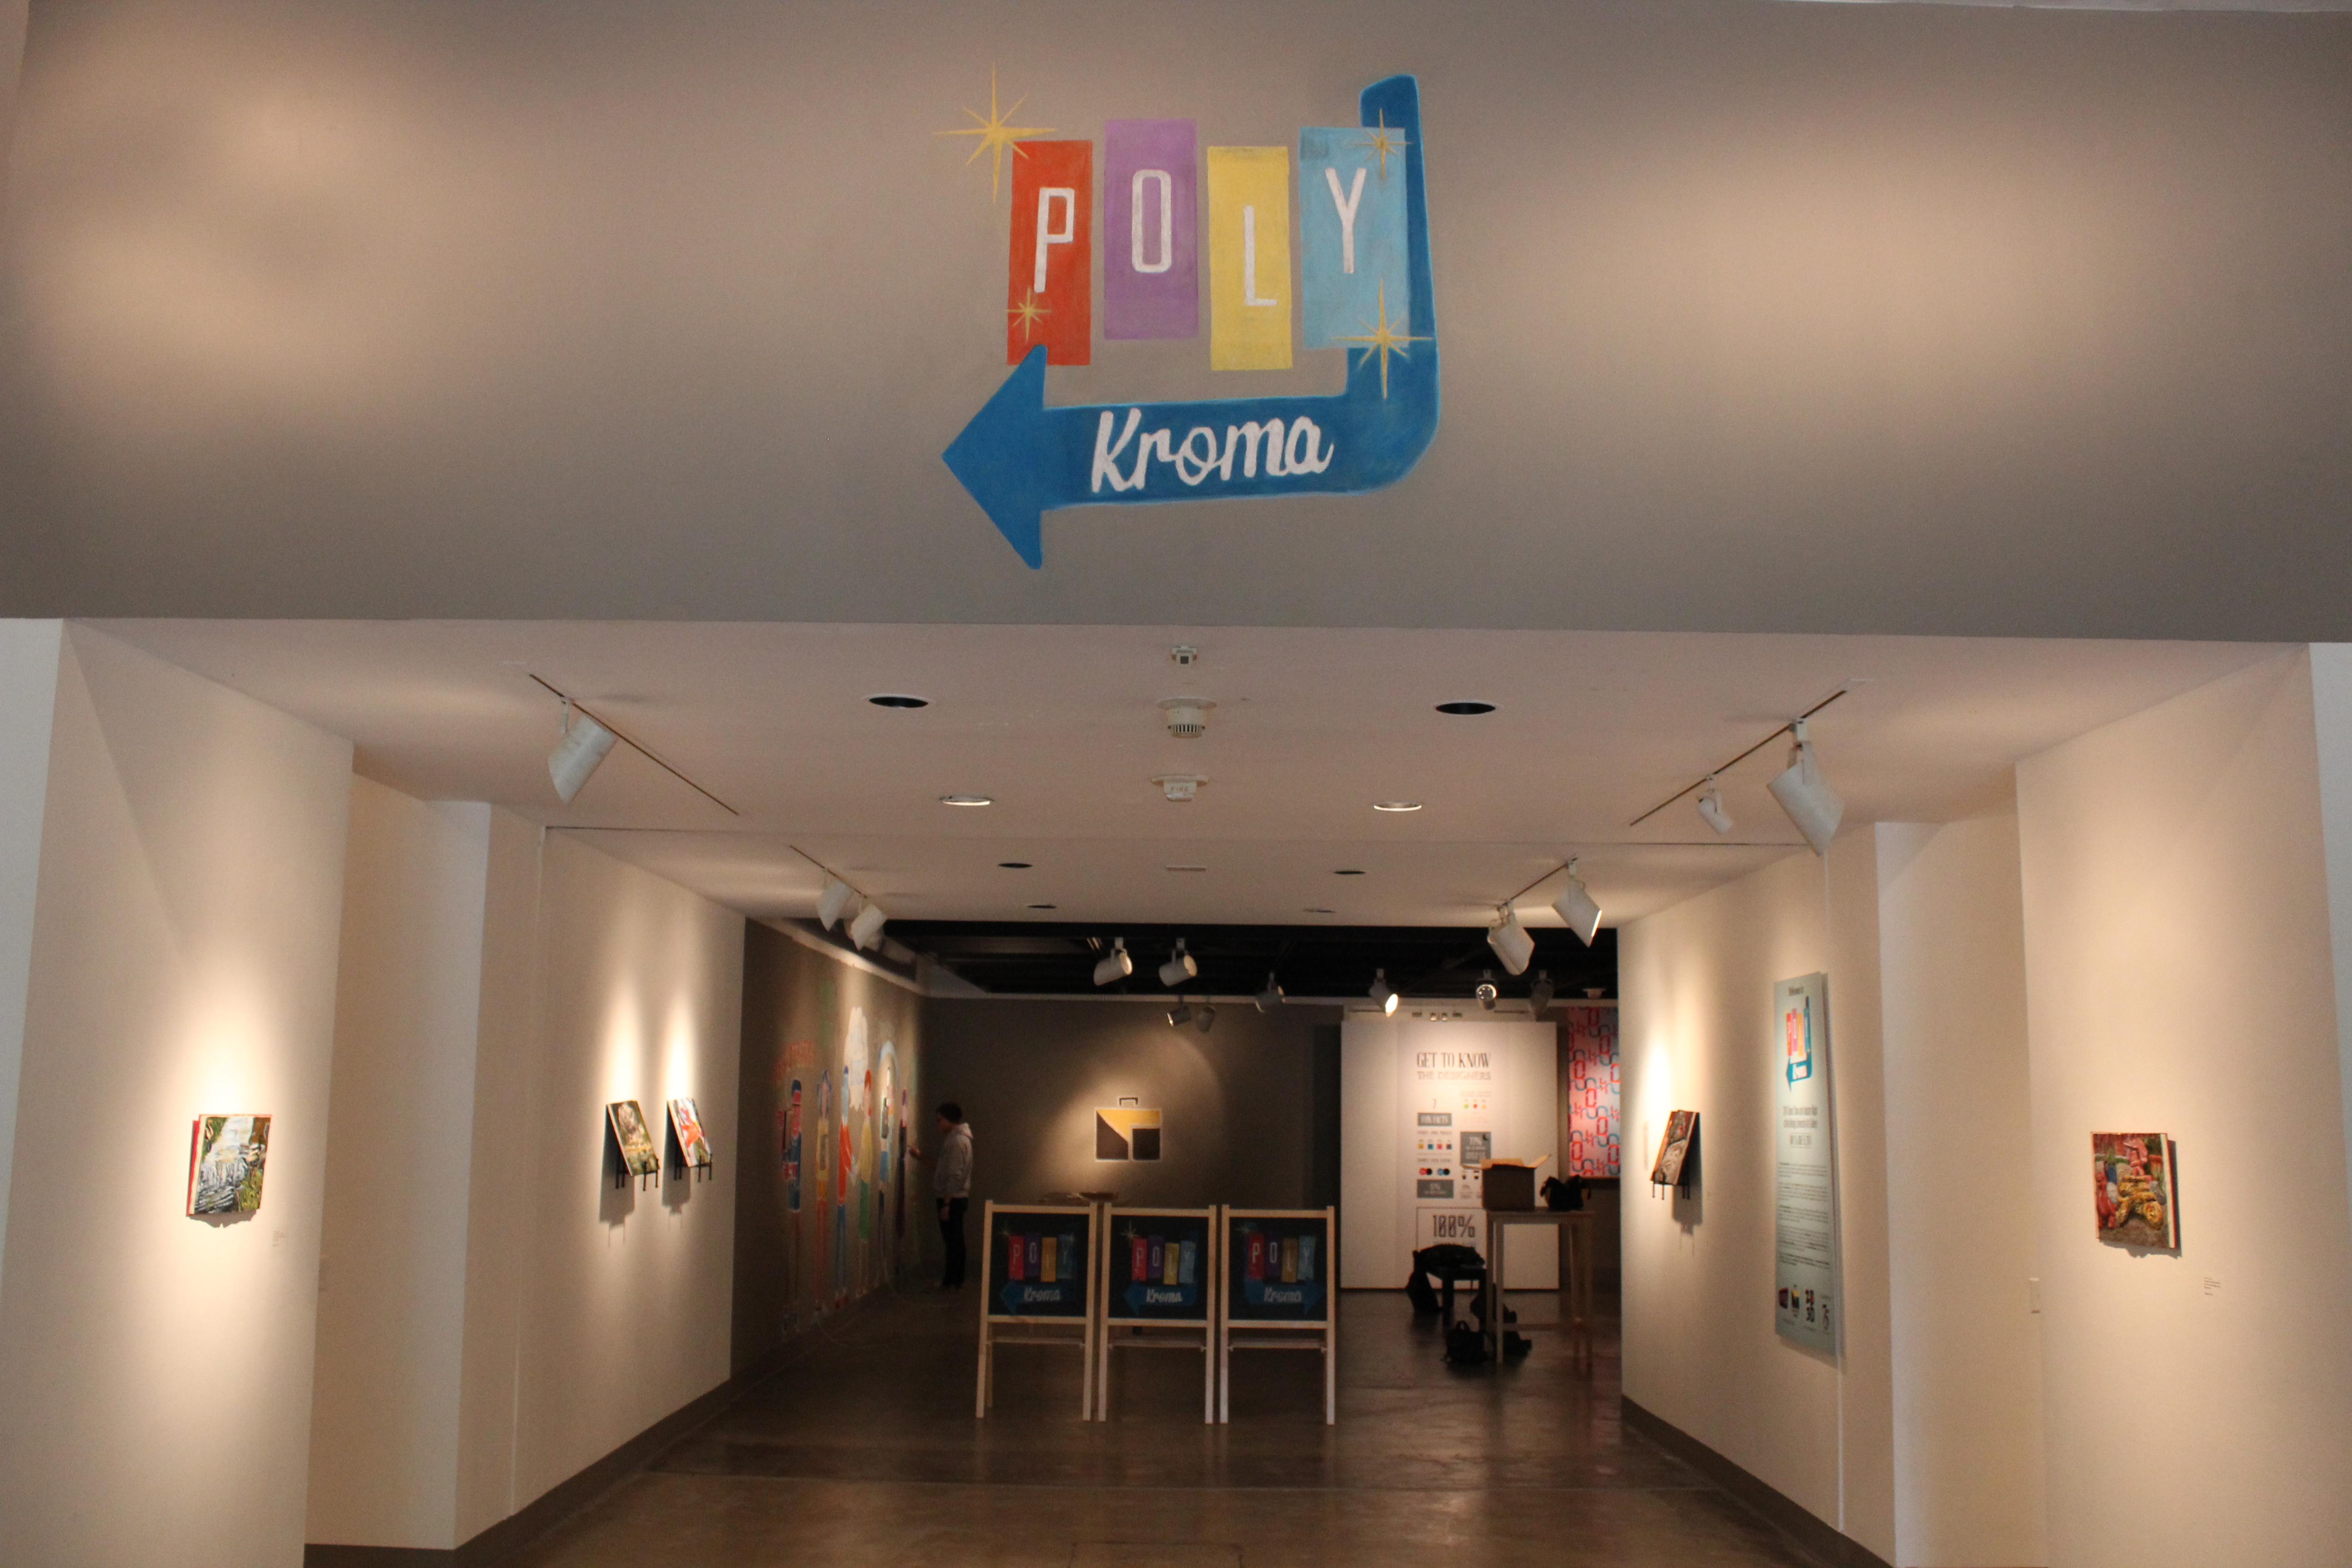 Installation View, Title Wall, Polykroma 2014 Exhibition, May. 19, 2014 to Jun. 15, 2014.